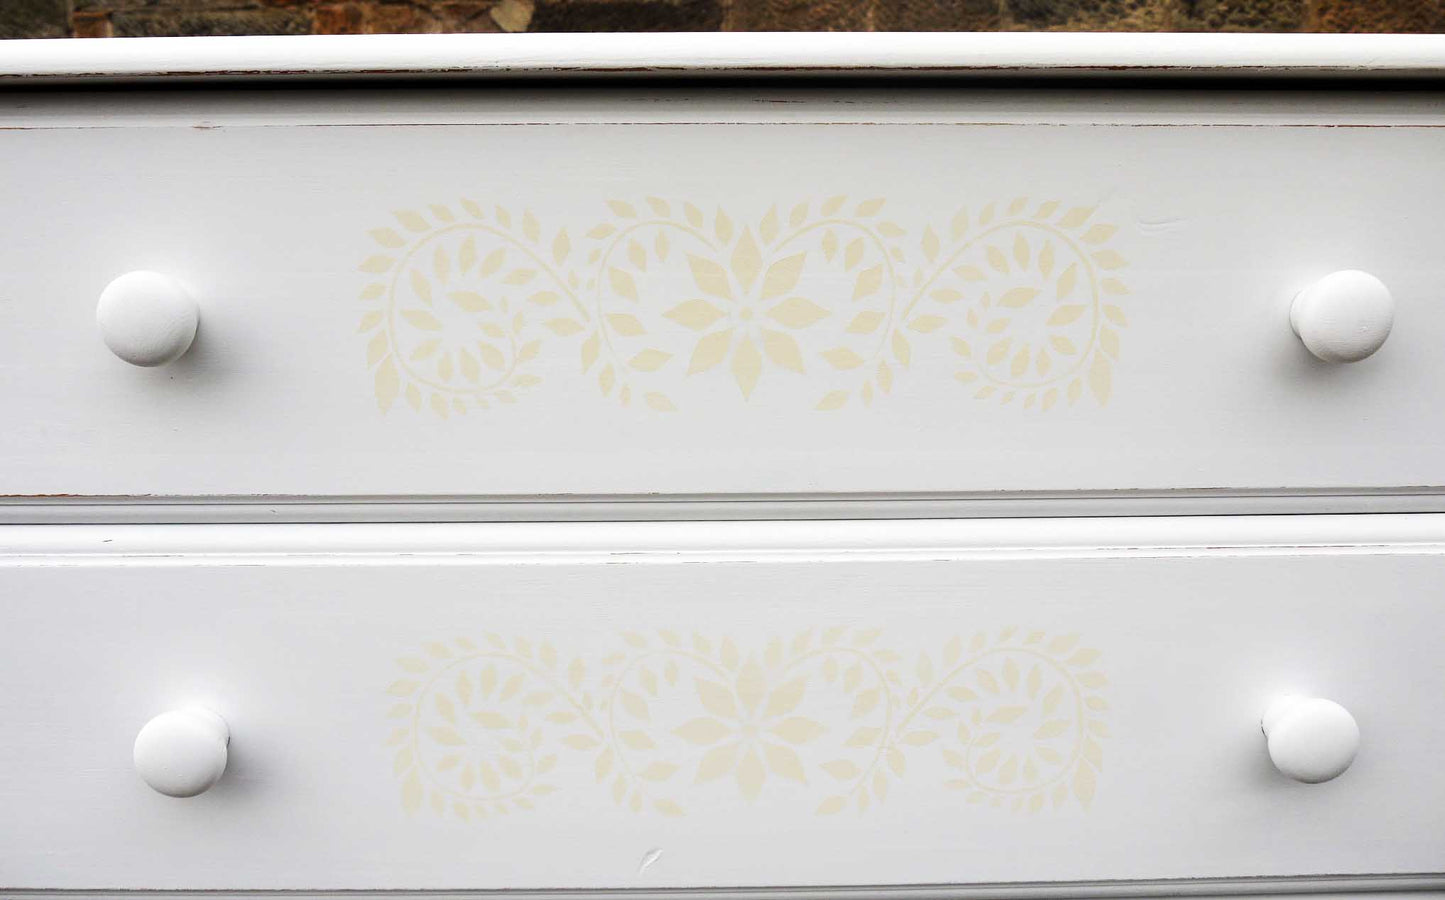 Custom Listing for Emma Shabby chic white painted chest of drawers with stencilled drawers